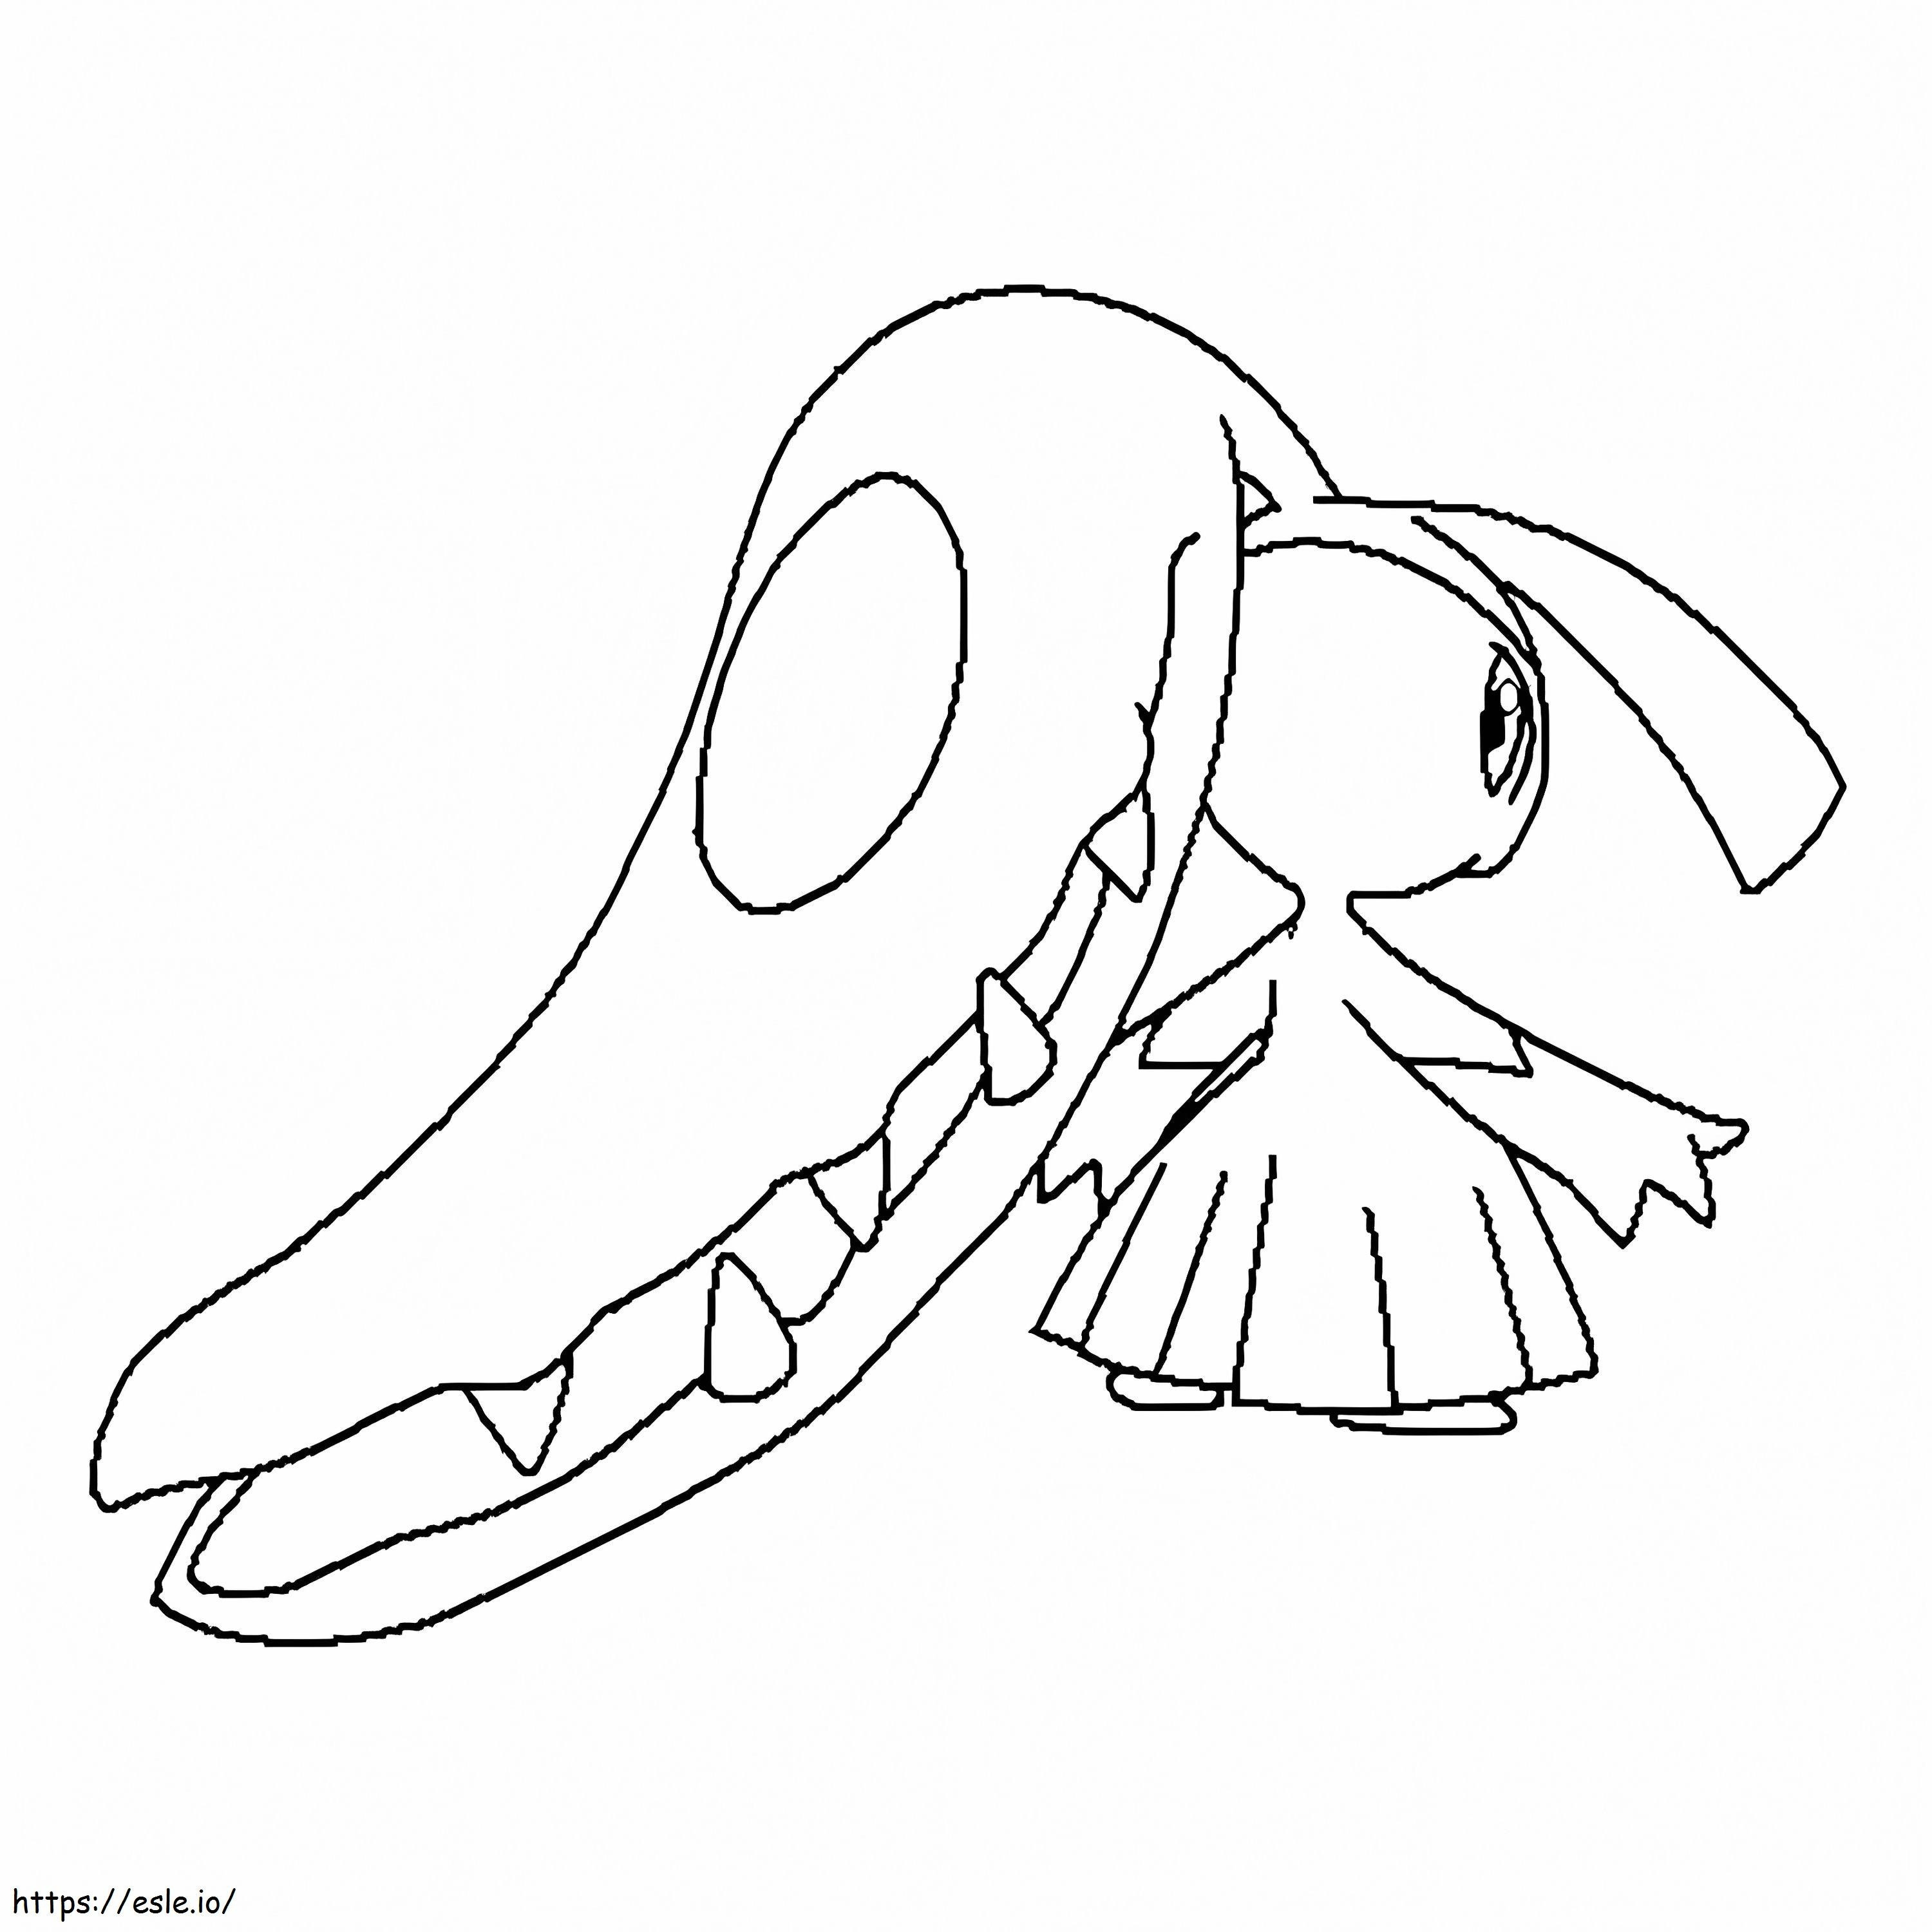 Mawile Pokemon coloring page